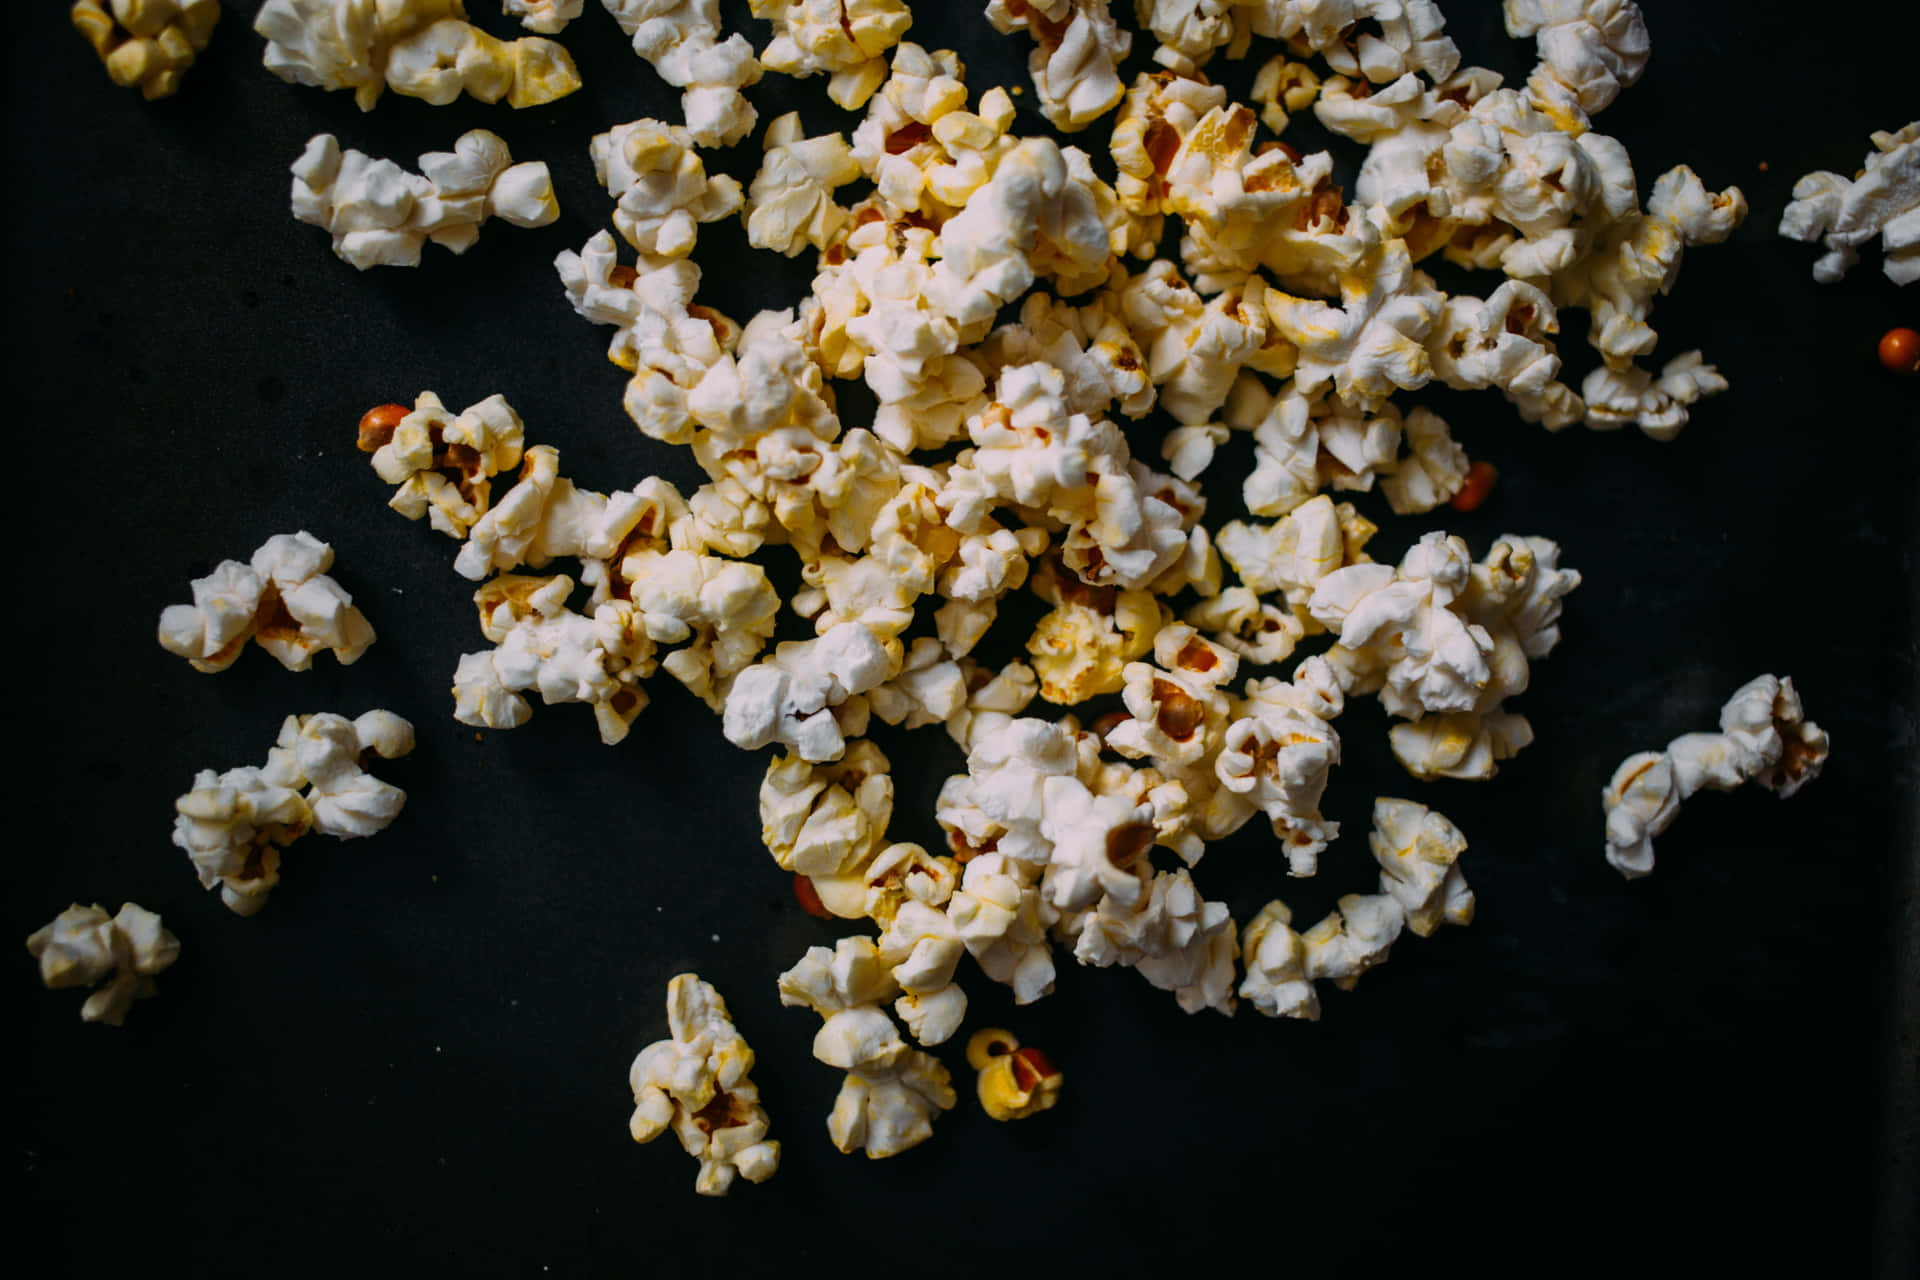 A Pile Of Popcorn On A Black Surface